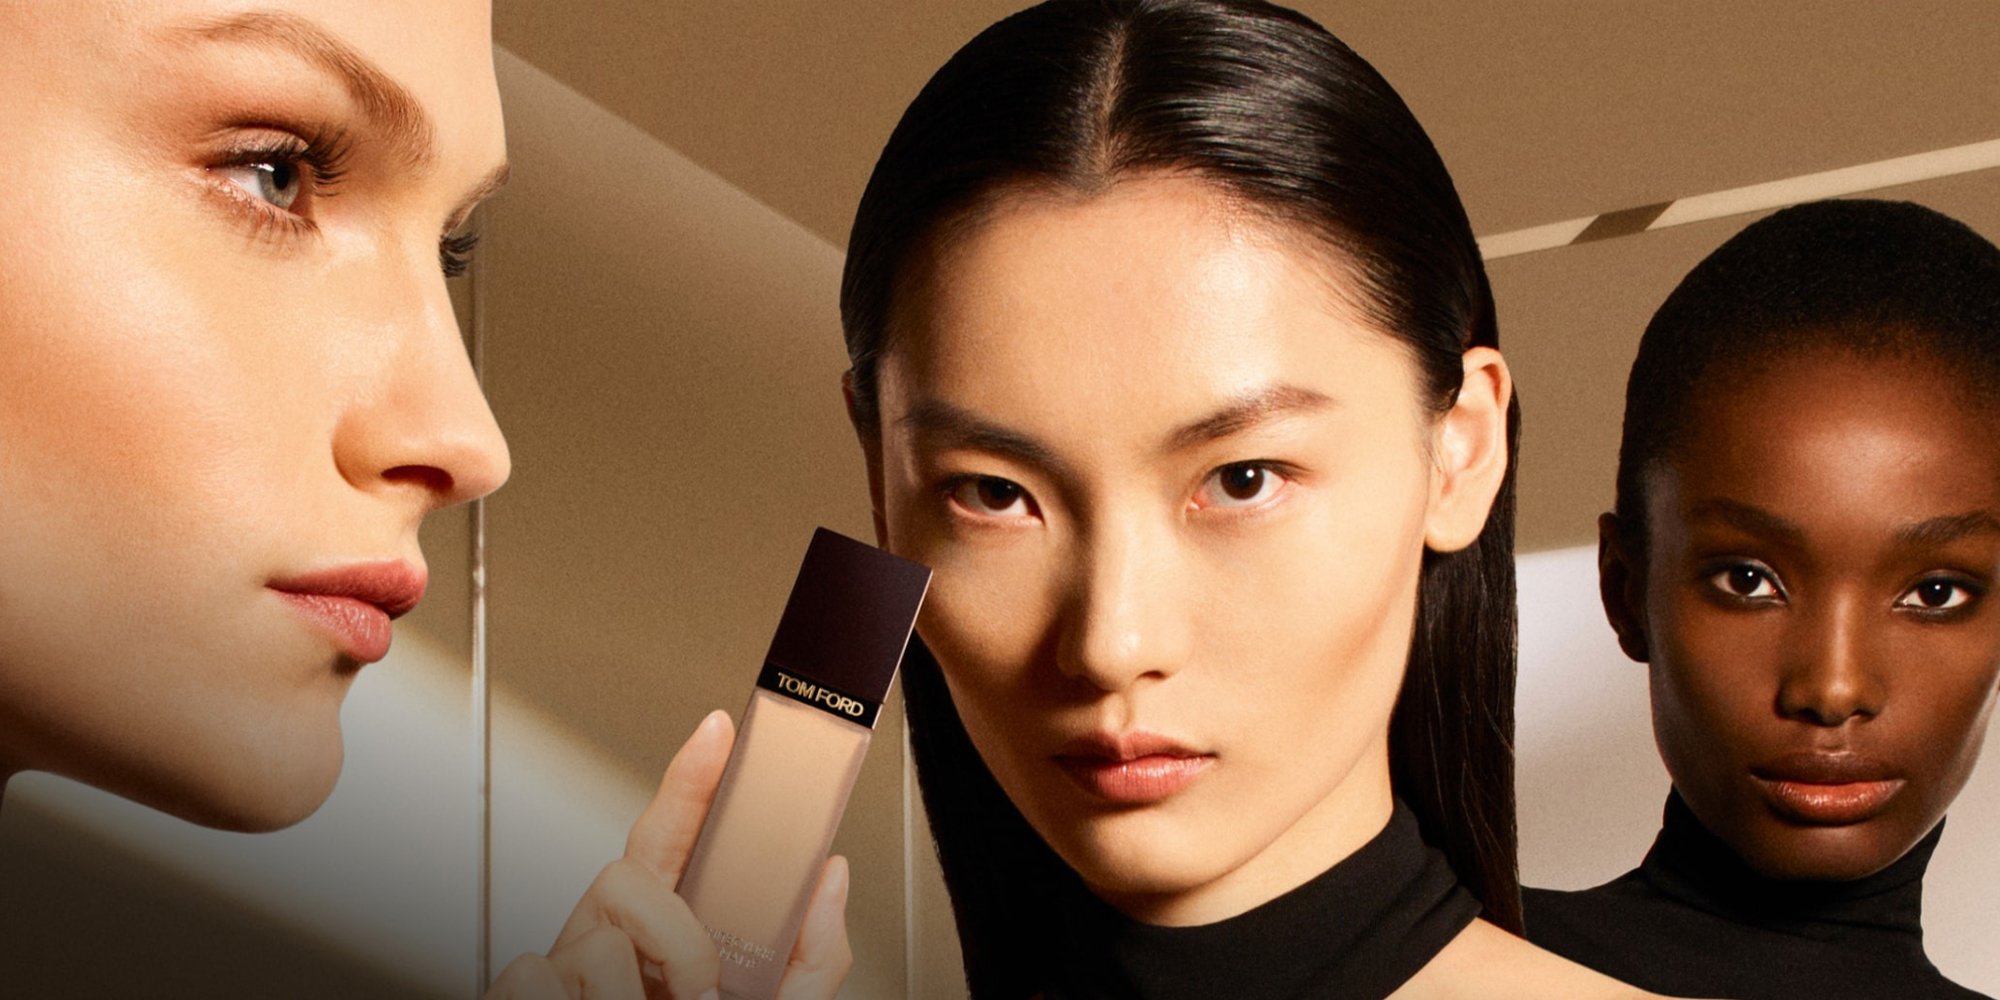 TOM FORD BEAUTY ARCHITECTURE FOUNDATION COLLECTION